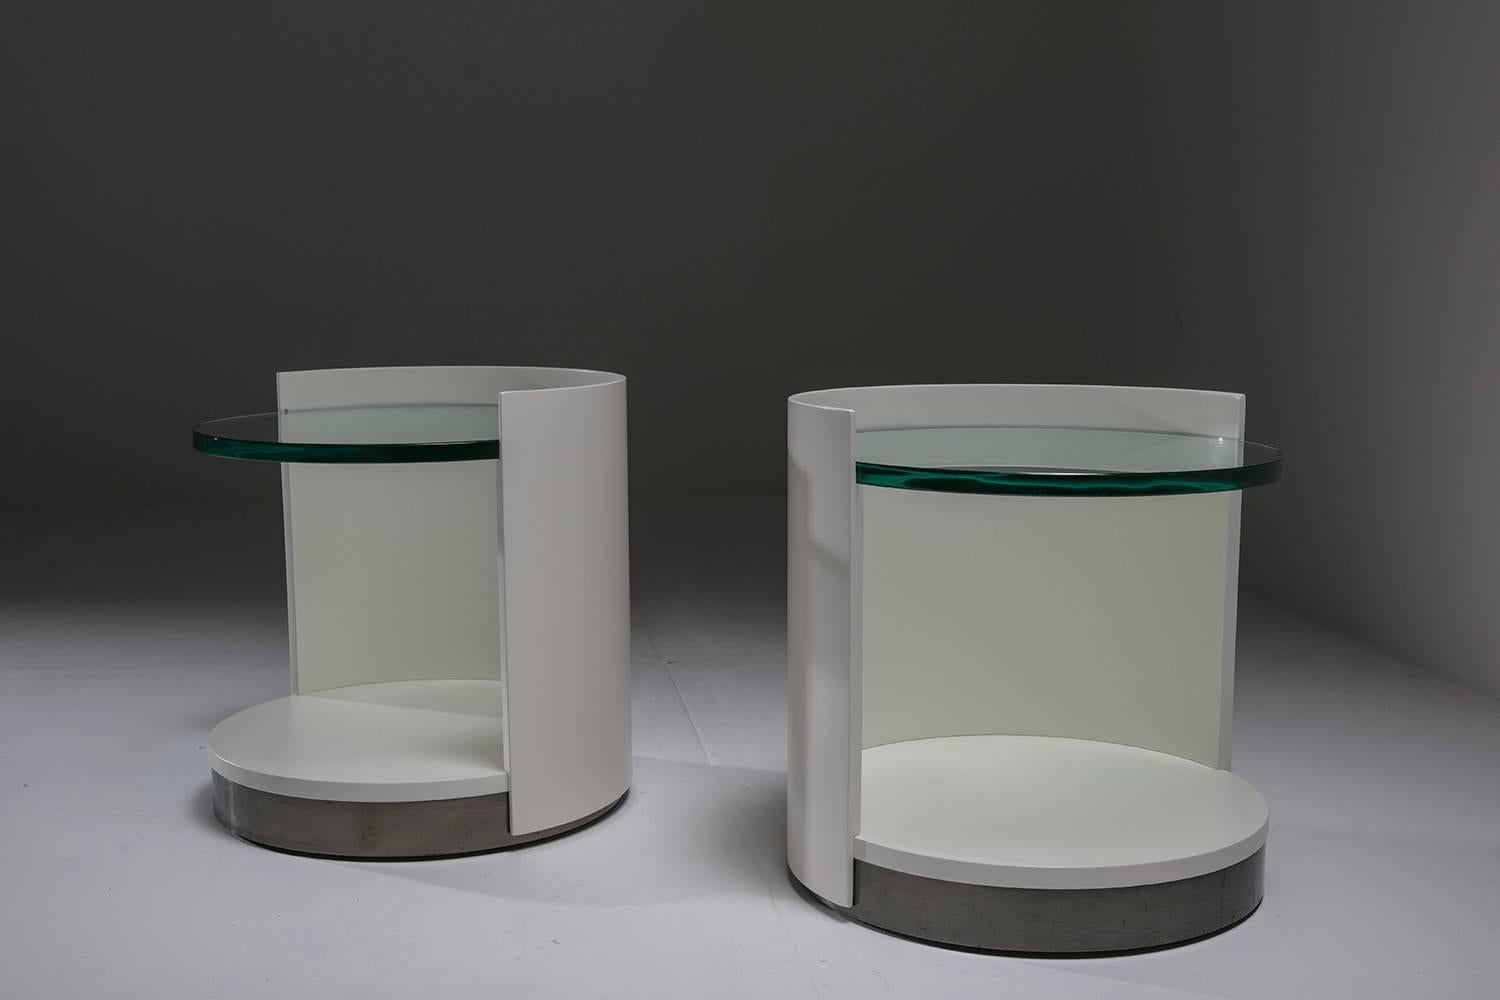 Remarkable pair of nightstands by Gianni Moscatelli for Formanova.
Each piece features a matte white lacquered wood frame, thick glass top and metal base on wheels.